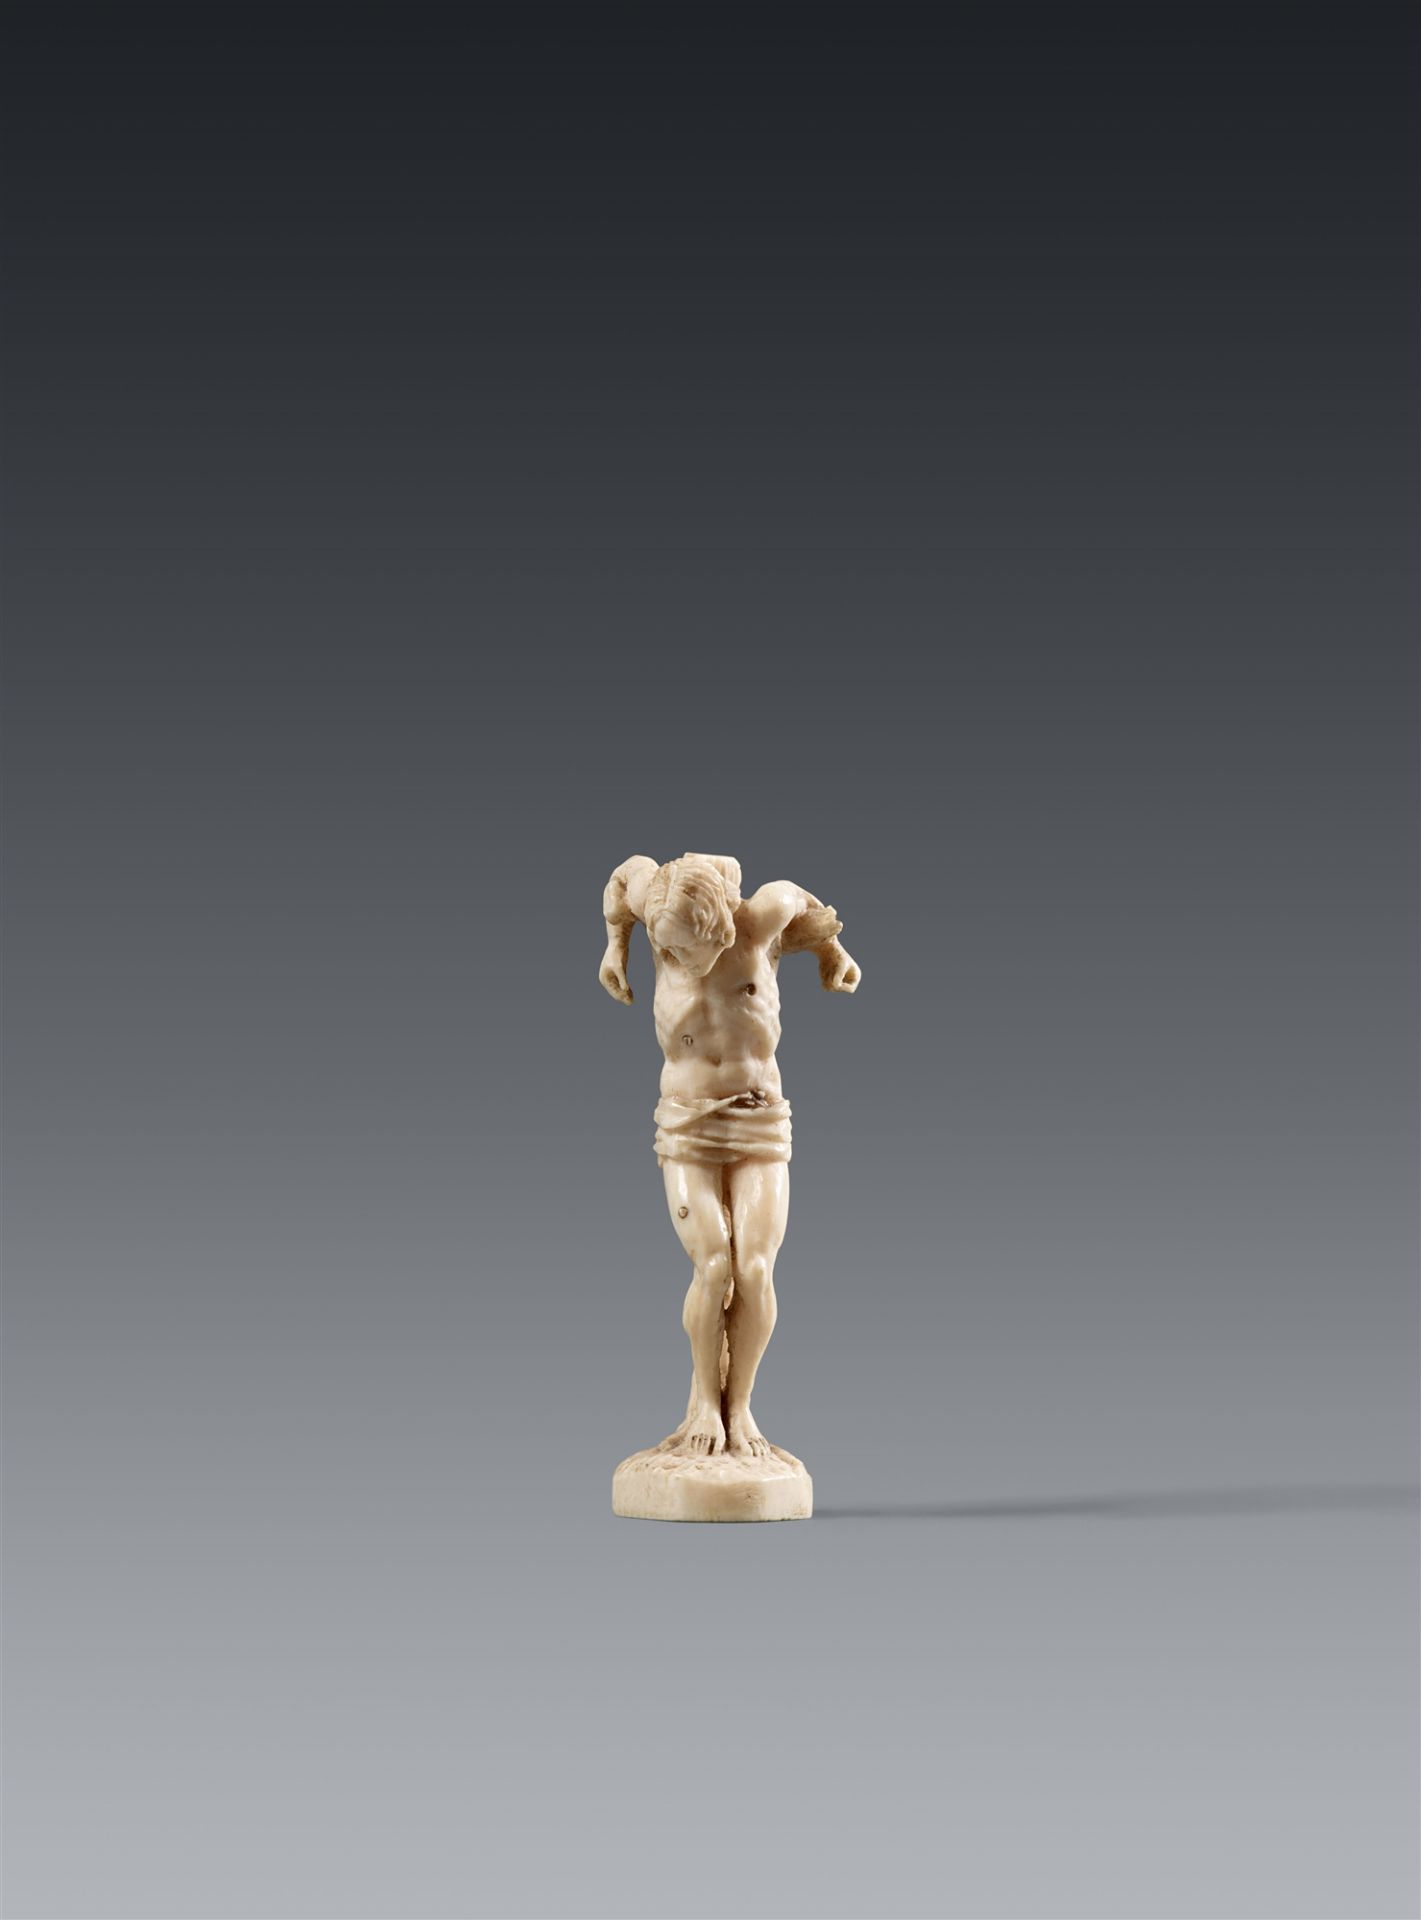 A 17th century German carved ivory figure of St Sebastian